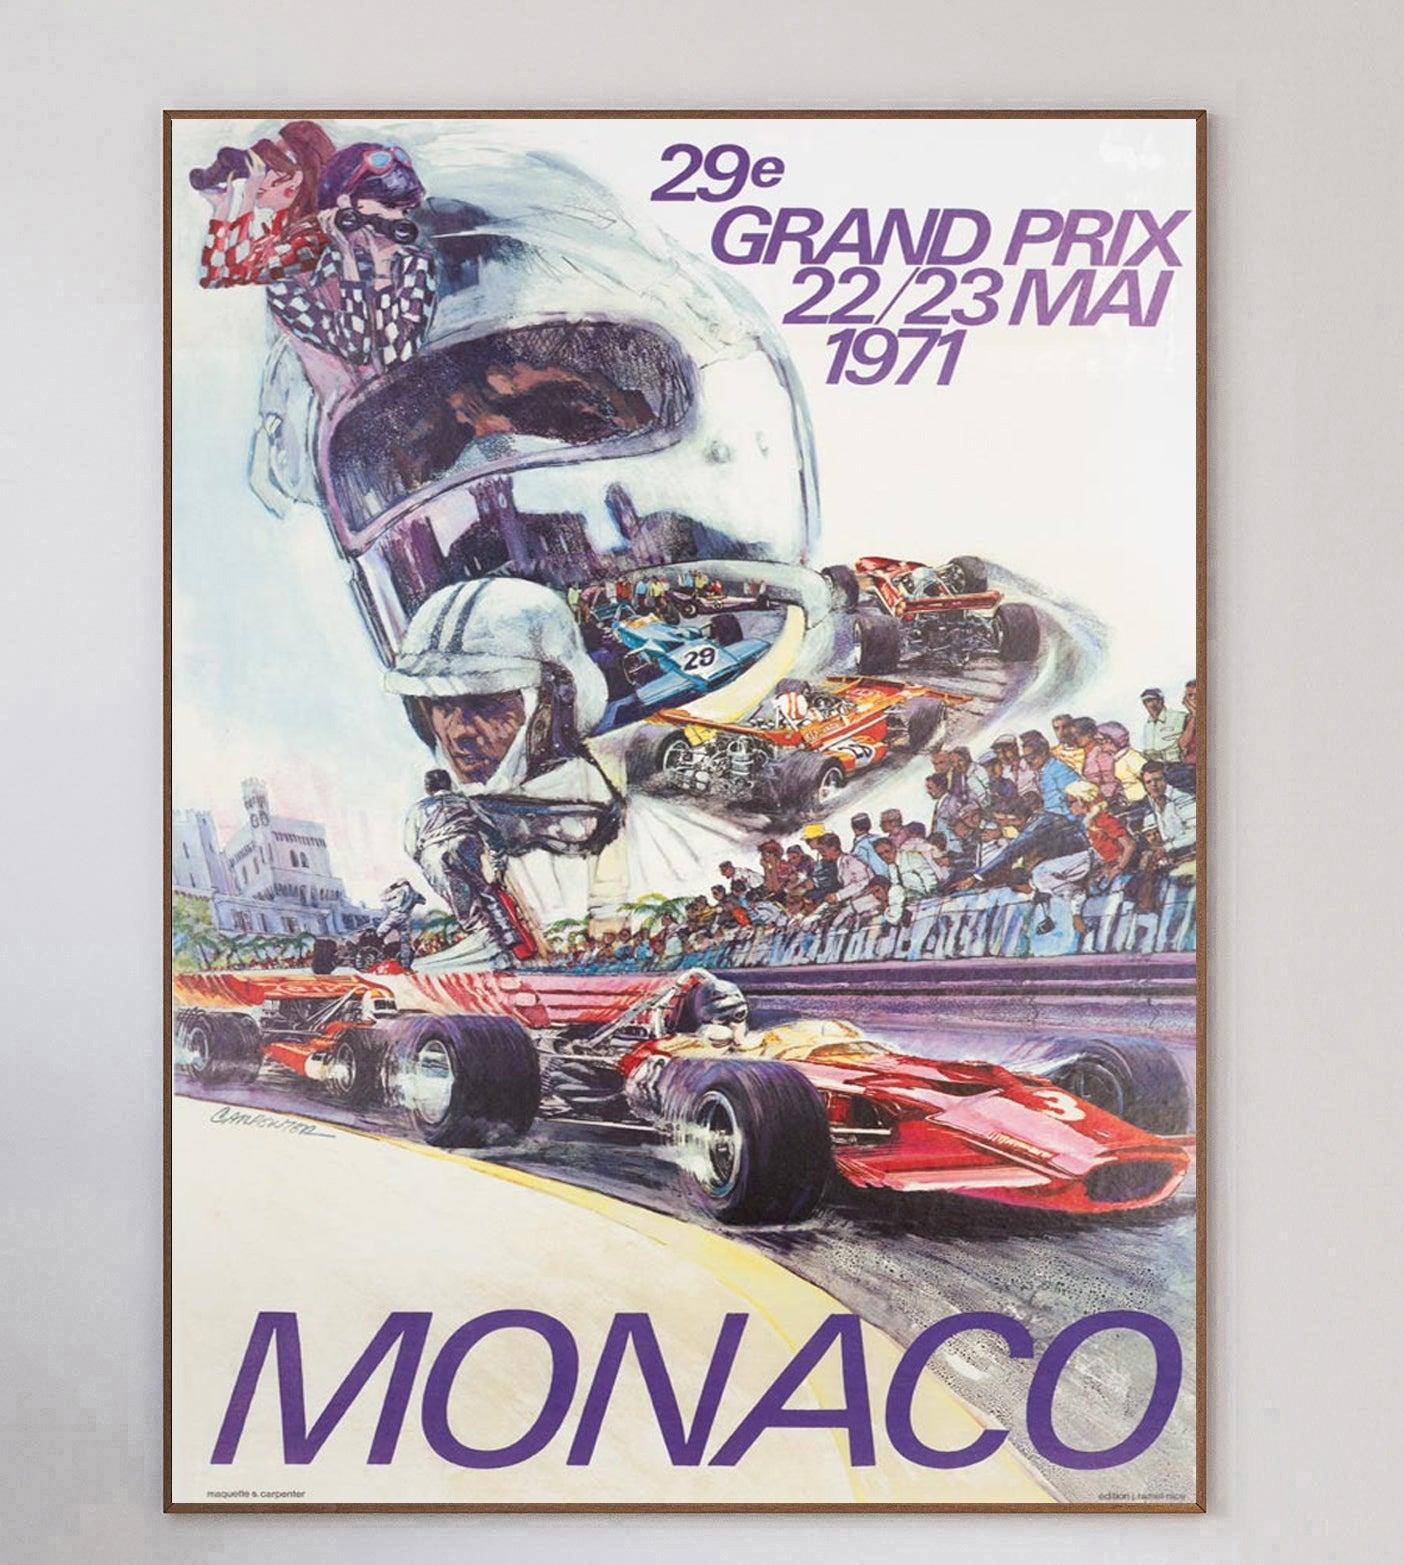 This poster is for the 1971 Monaco Grand Prix, with the brilliant illustration design by Carpenter depicting the previous years winner Jochen Rindt driving for Lotus-Ford.

The wonderful poster shows the cars racing along the waterfront in the